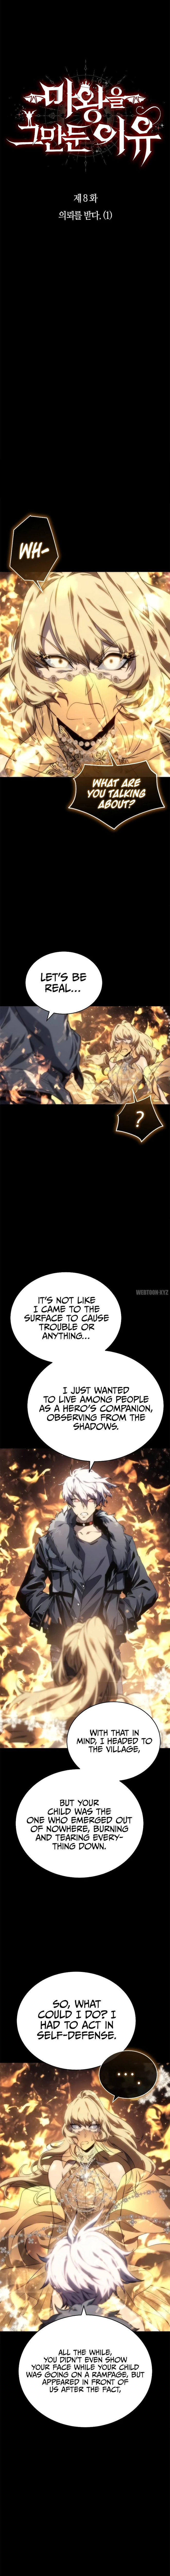 why-i-quit-being-the-demon-king-chap-8-2